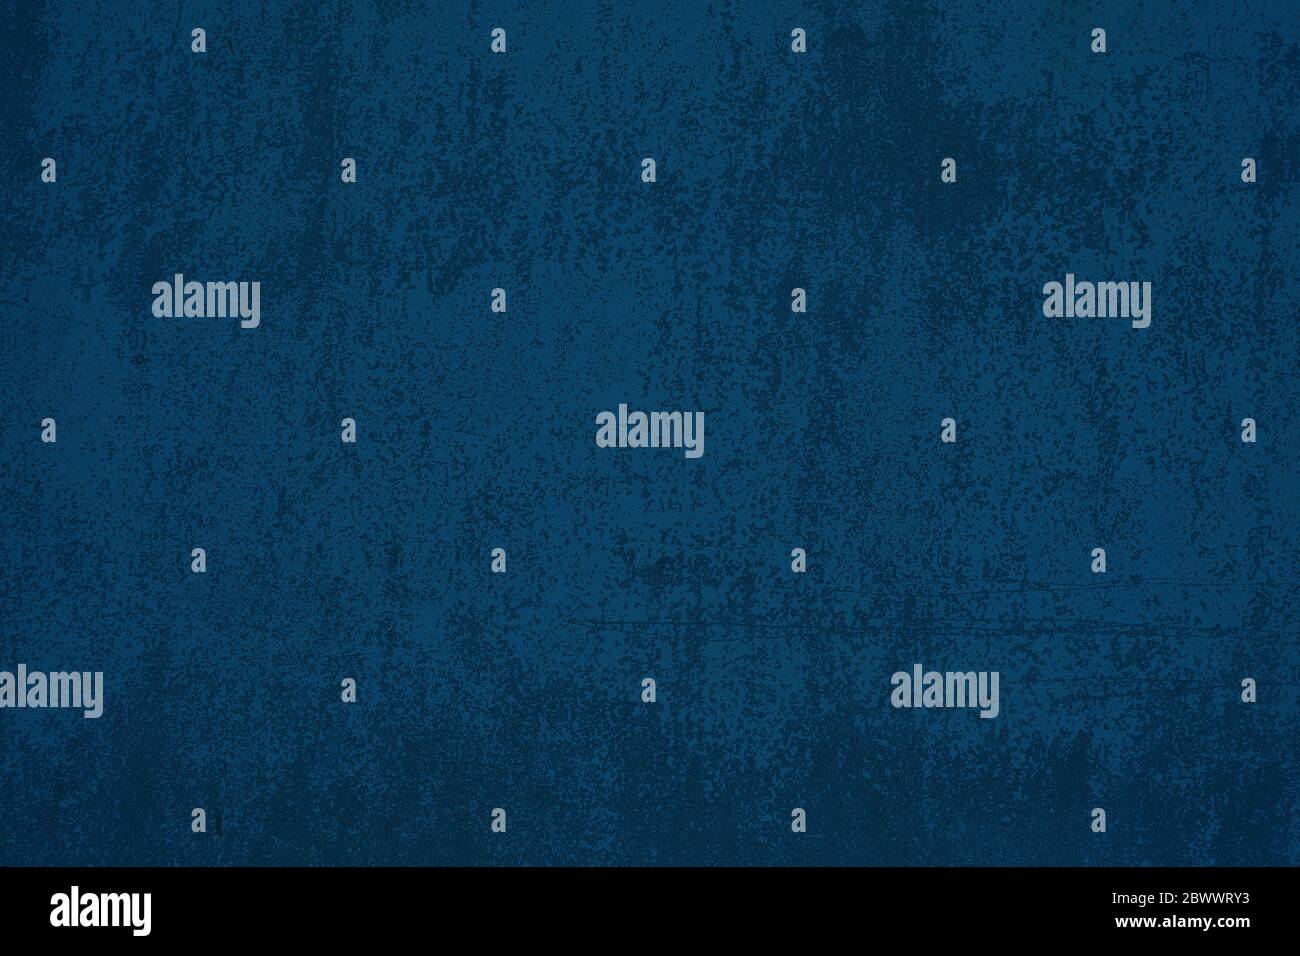 Blue Grunge Concrete Wall Texture Background. Stock Photo